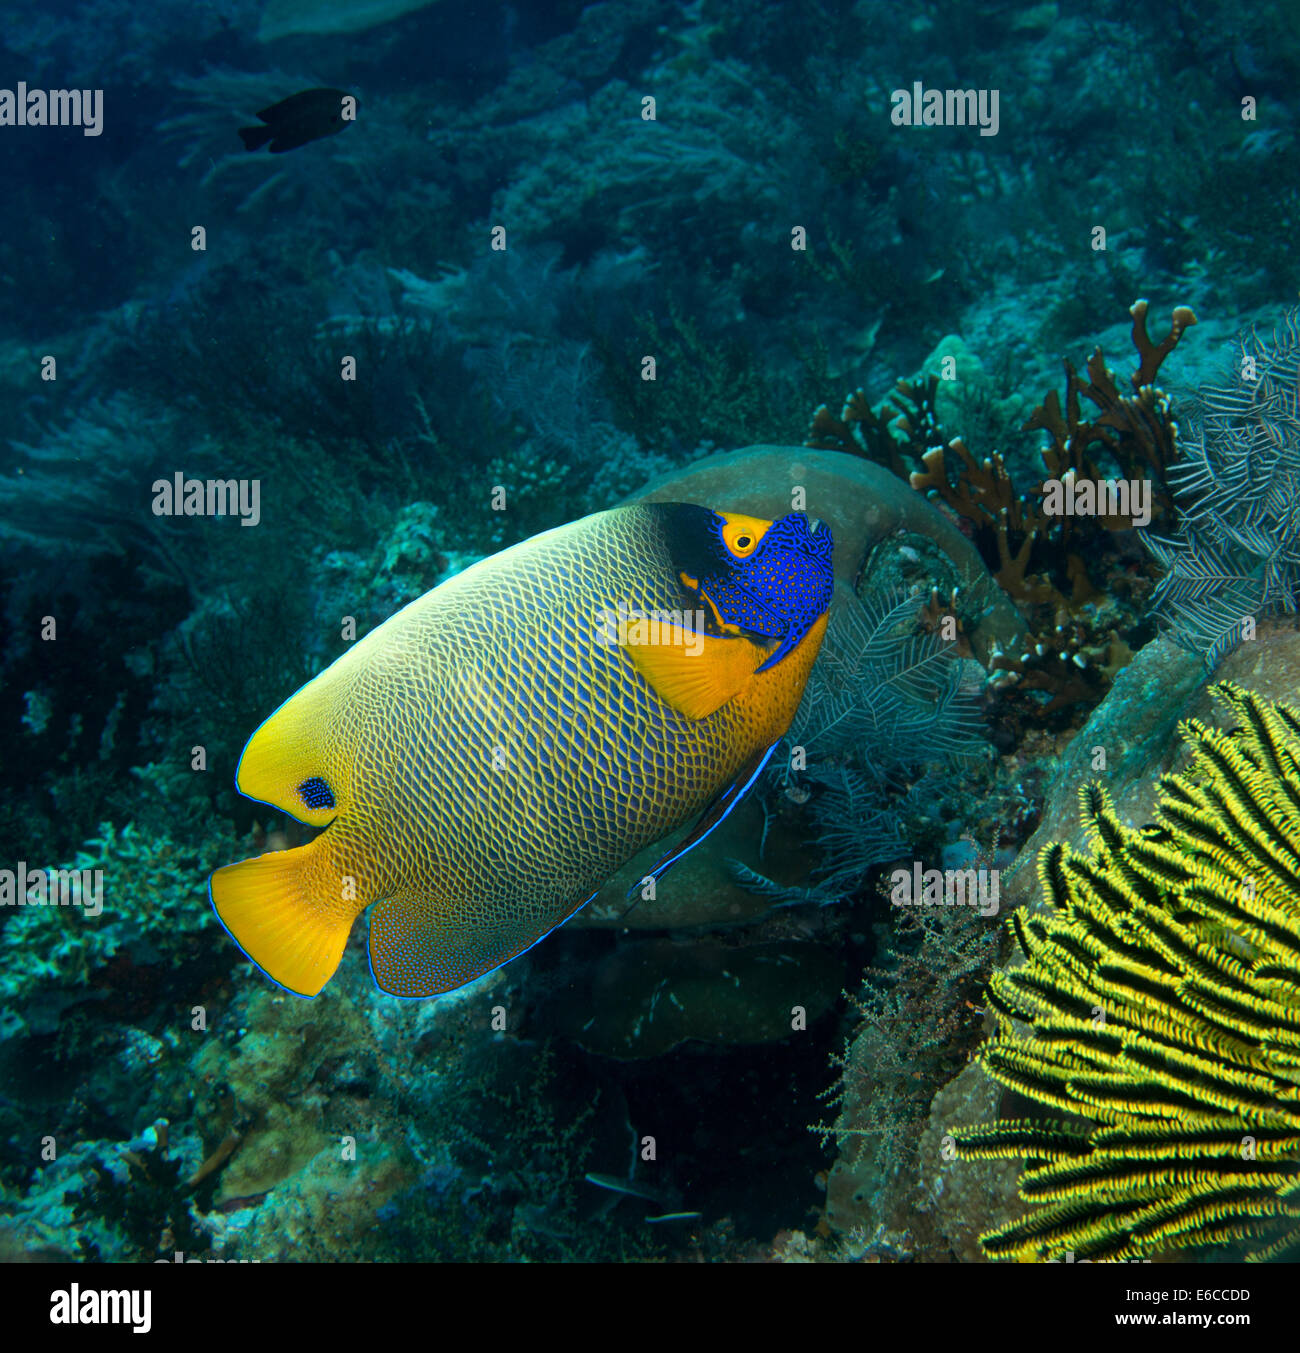 Yellow-masked angelfish swims along the coral reef. Stock Photo